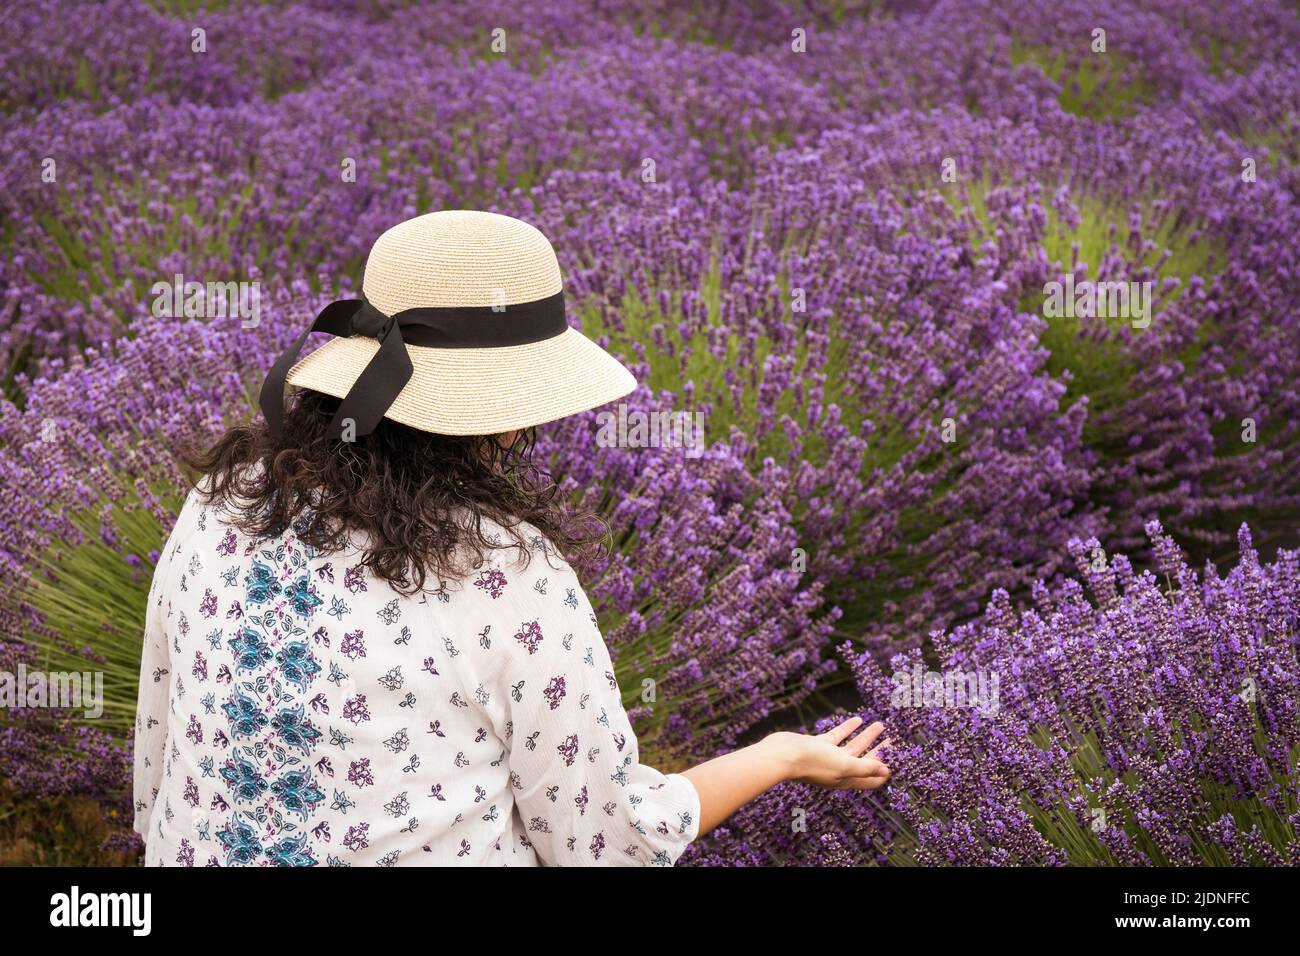 Woman with Dark Curly Hair Wearing a Sun Hat in a Purple Lavender Field Stock Photo